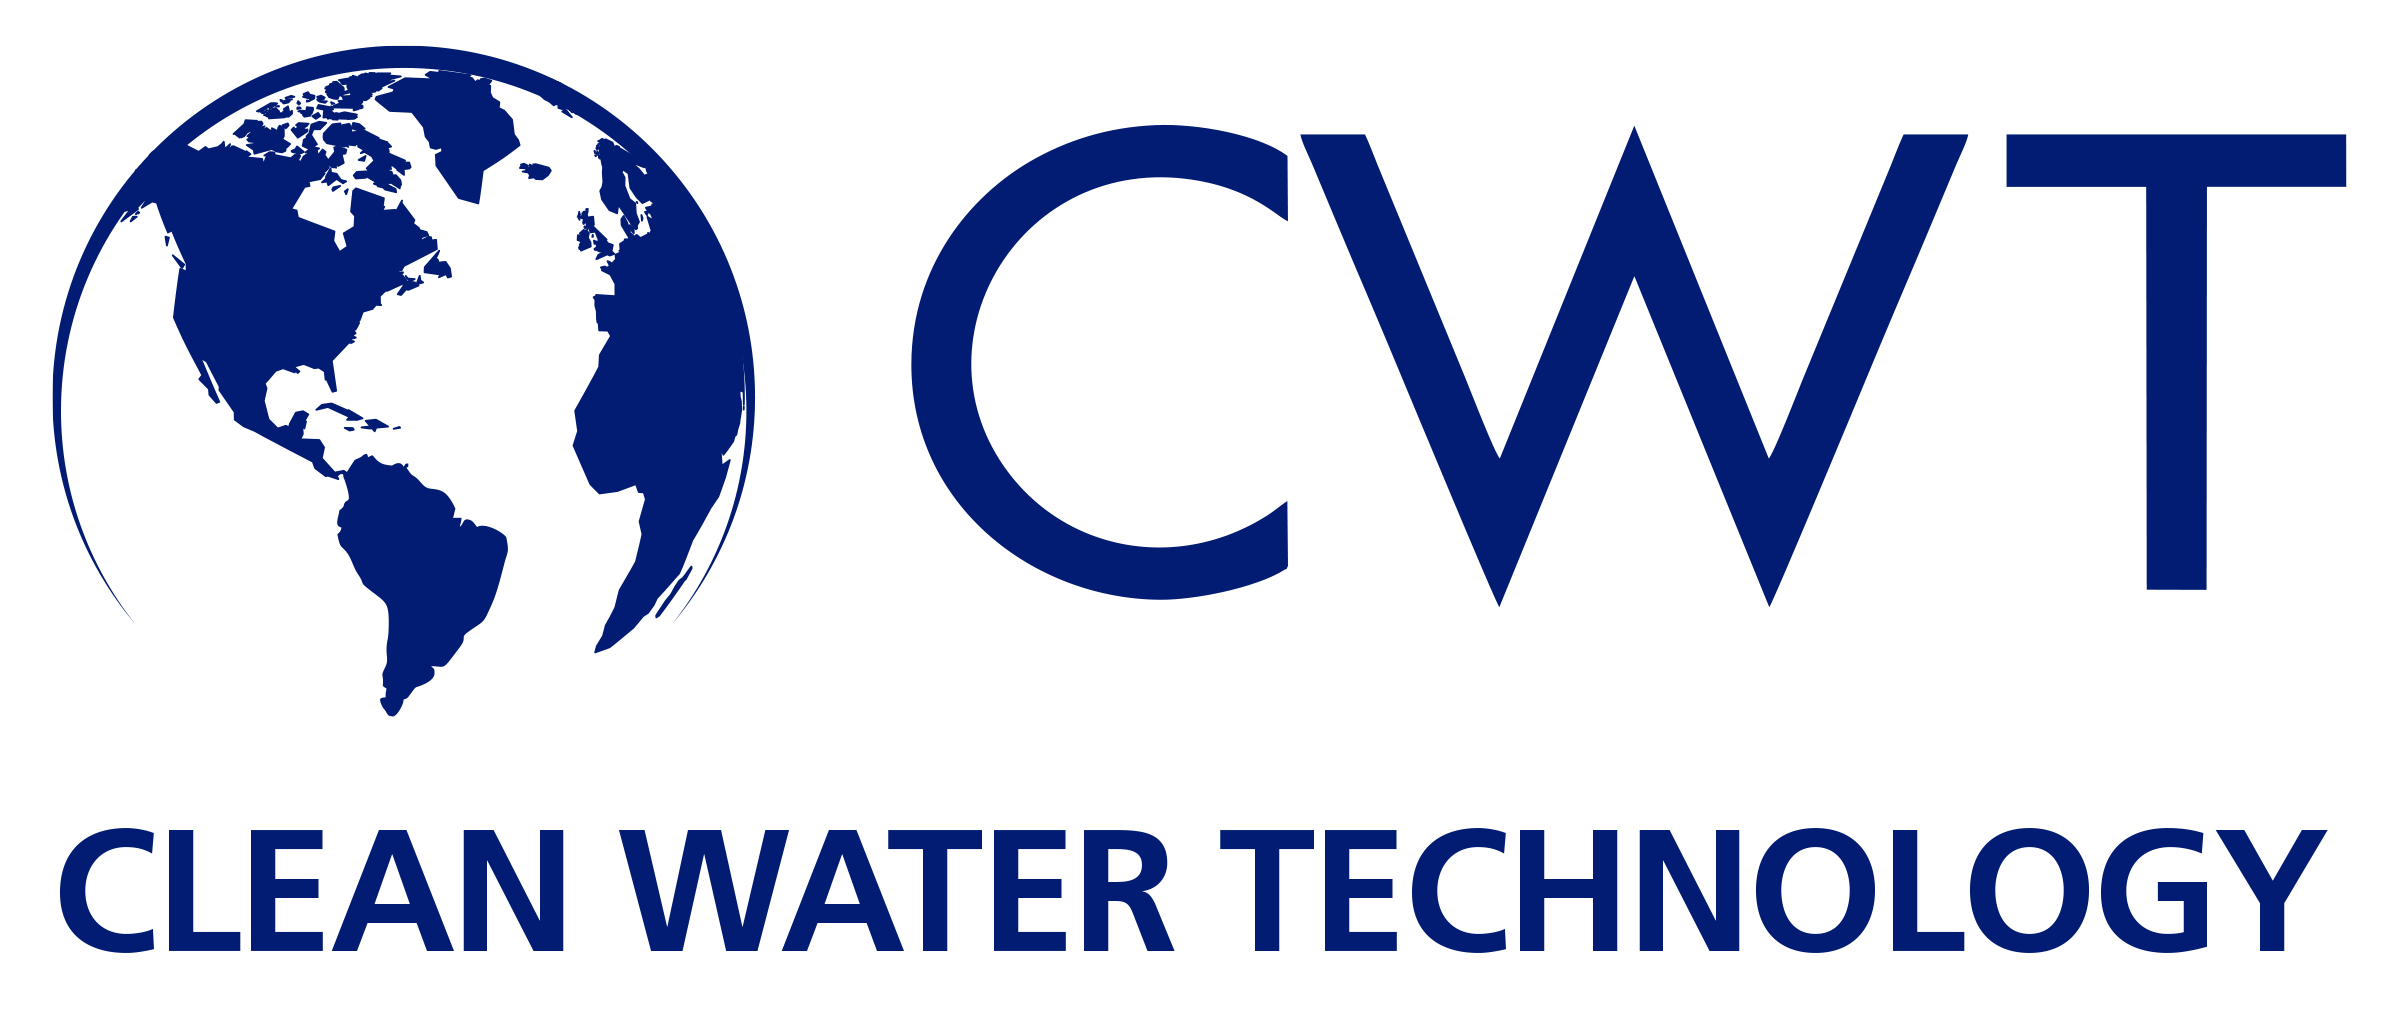 Clean Water Technology